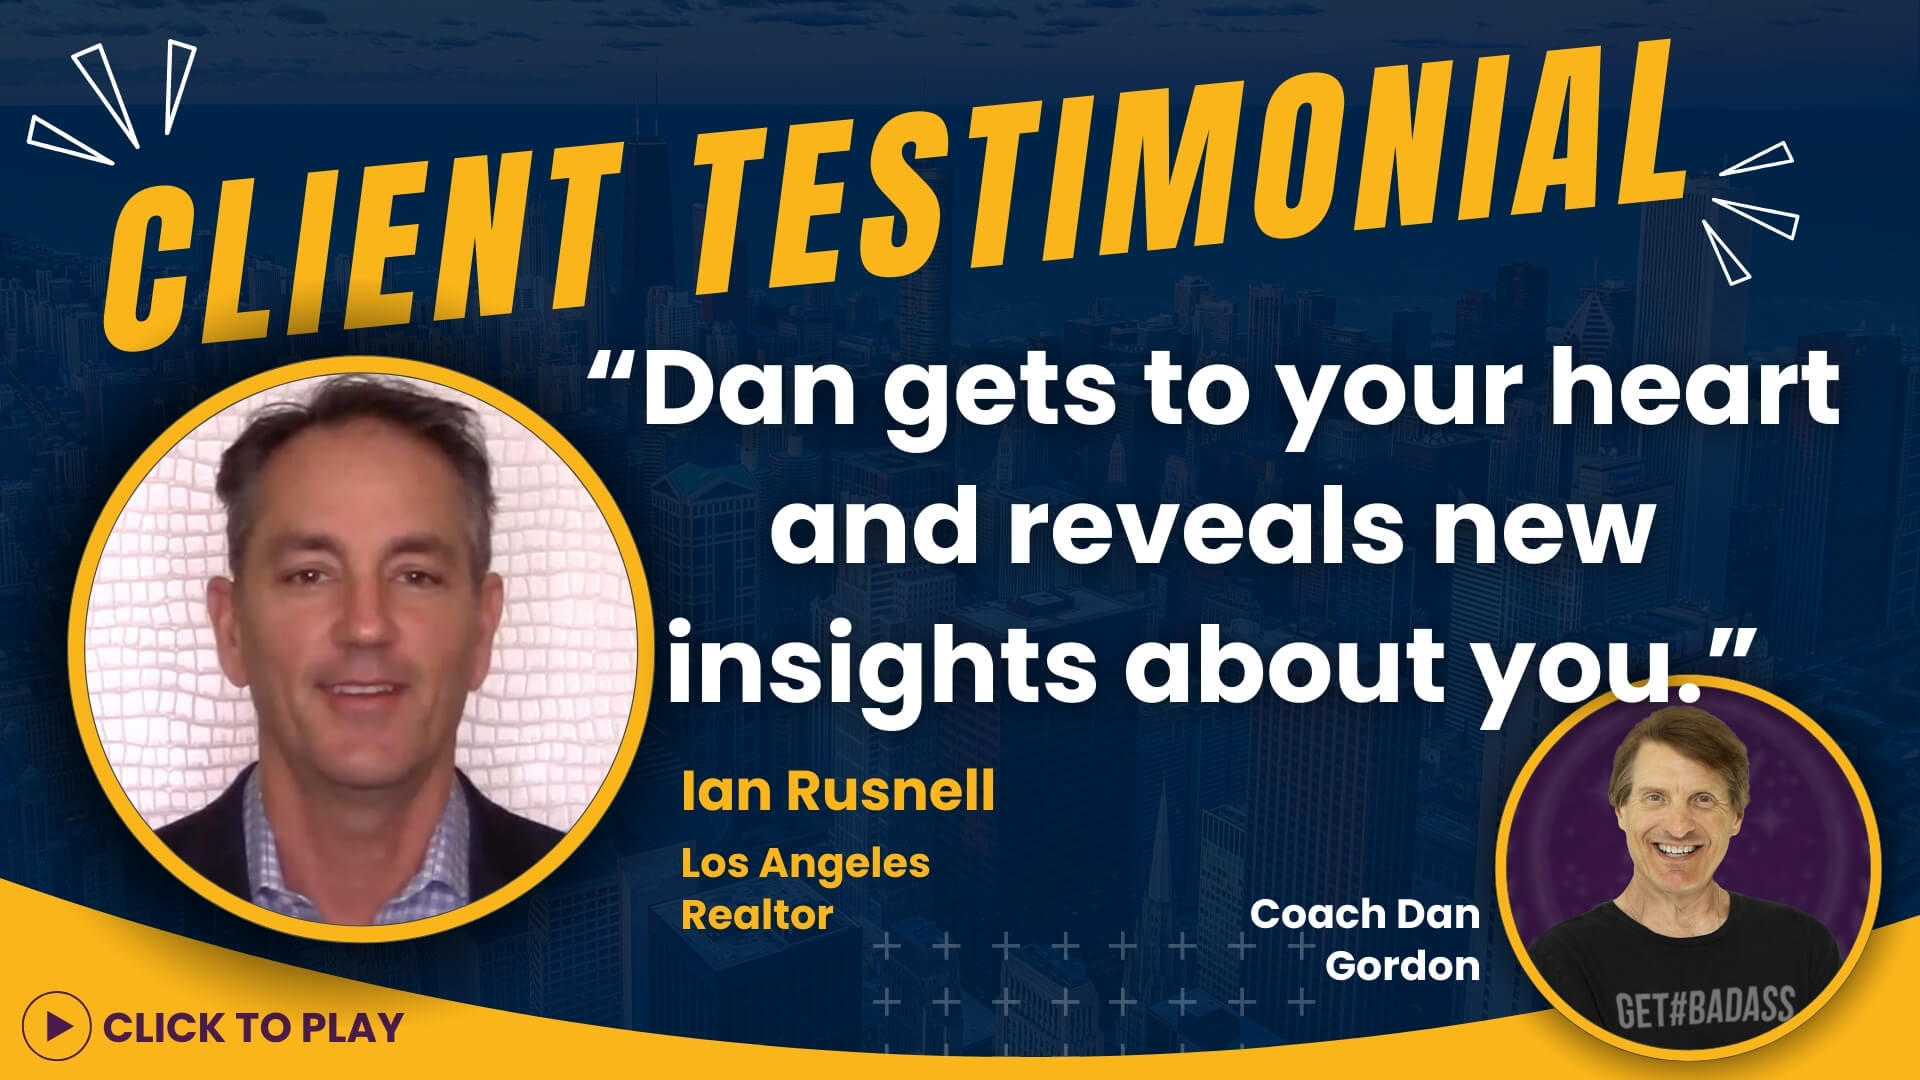 Ian Rusnell, smiling in a professional portrait, provides a heartfelt testimonial for Coach Dan Gordon, referencing personal insights gained.